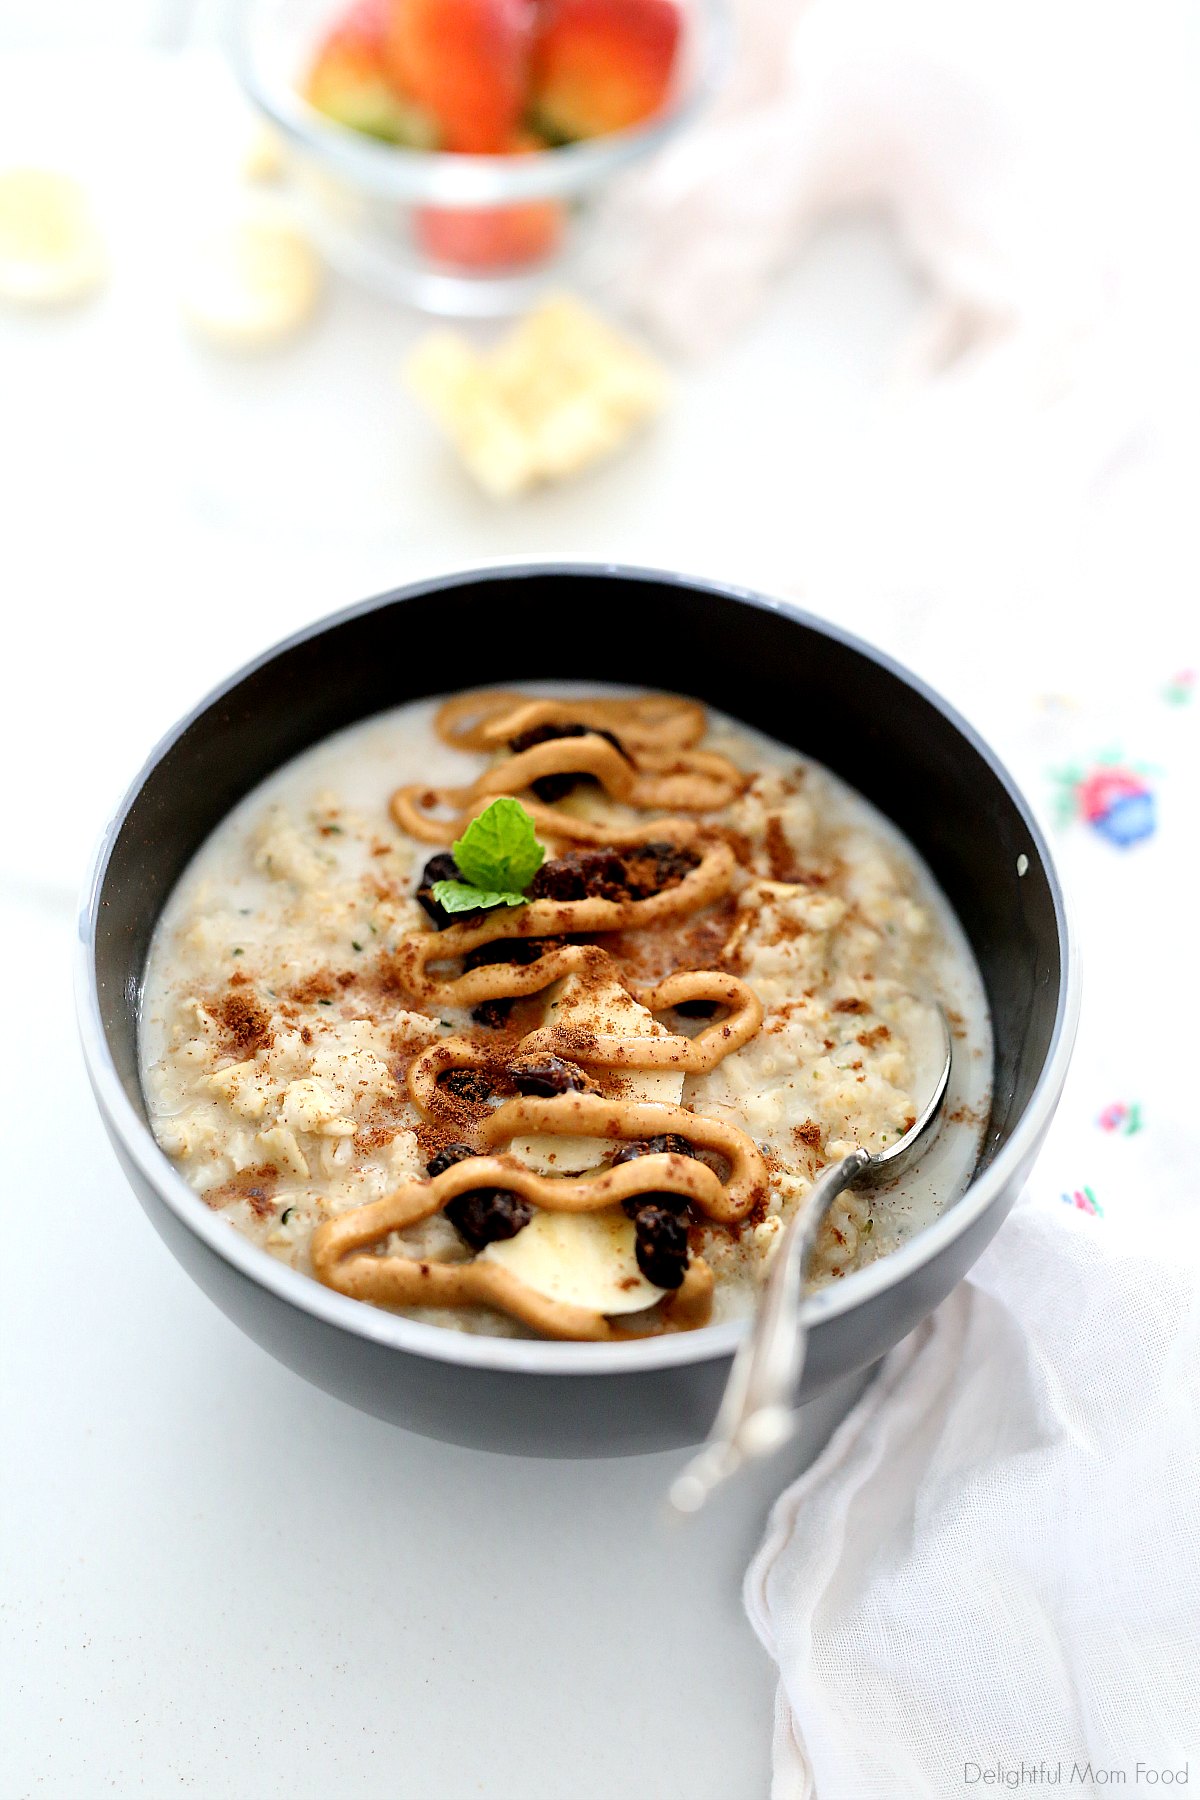 bowl of peanut butter oatmeal with banana slices, raisins and cinnamon